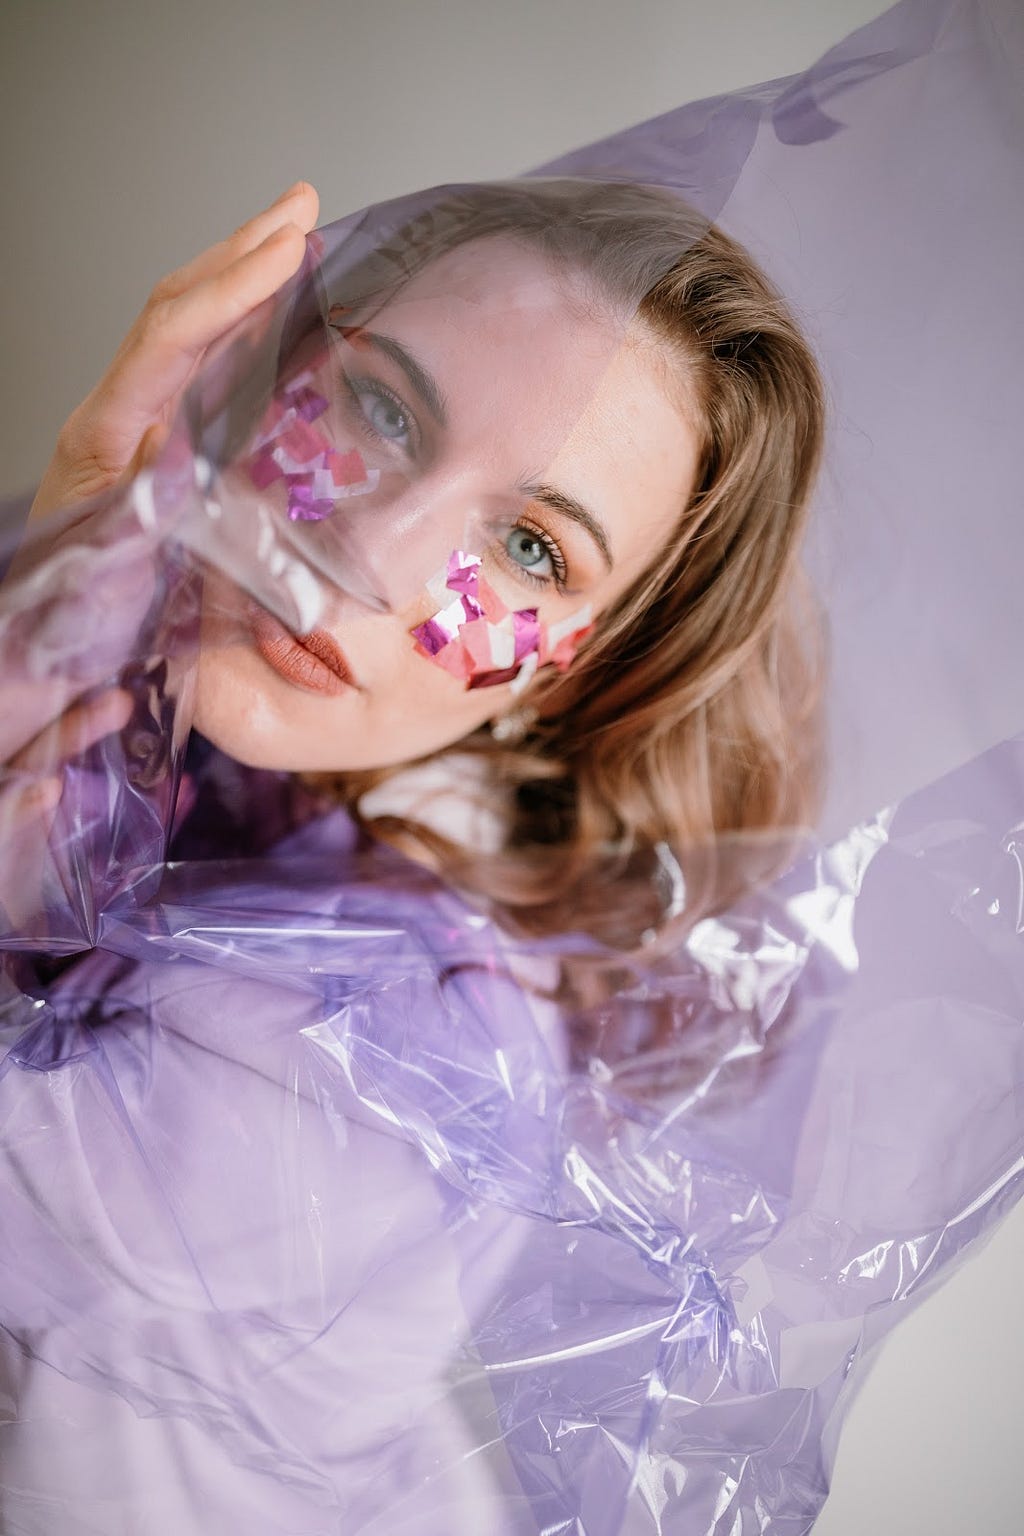 Alex Lilly poses with whimsical fabric and colorful makeup.